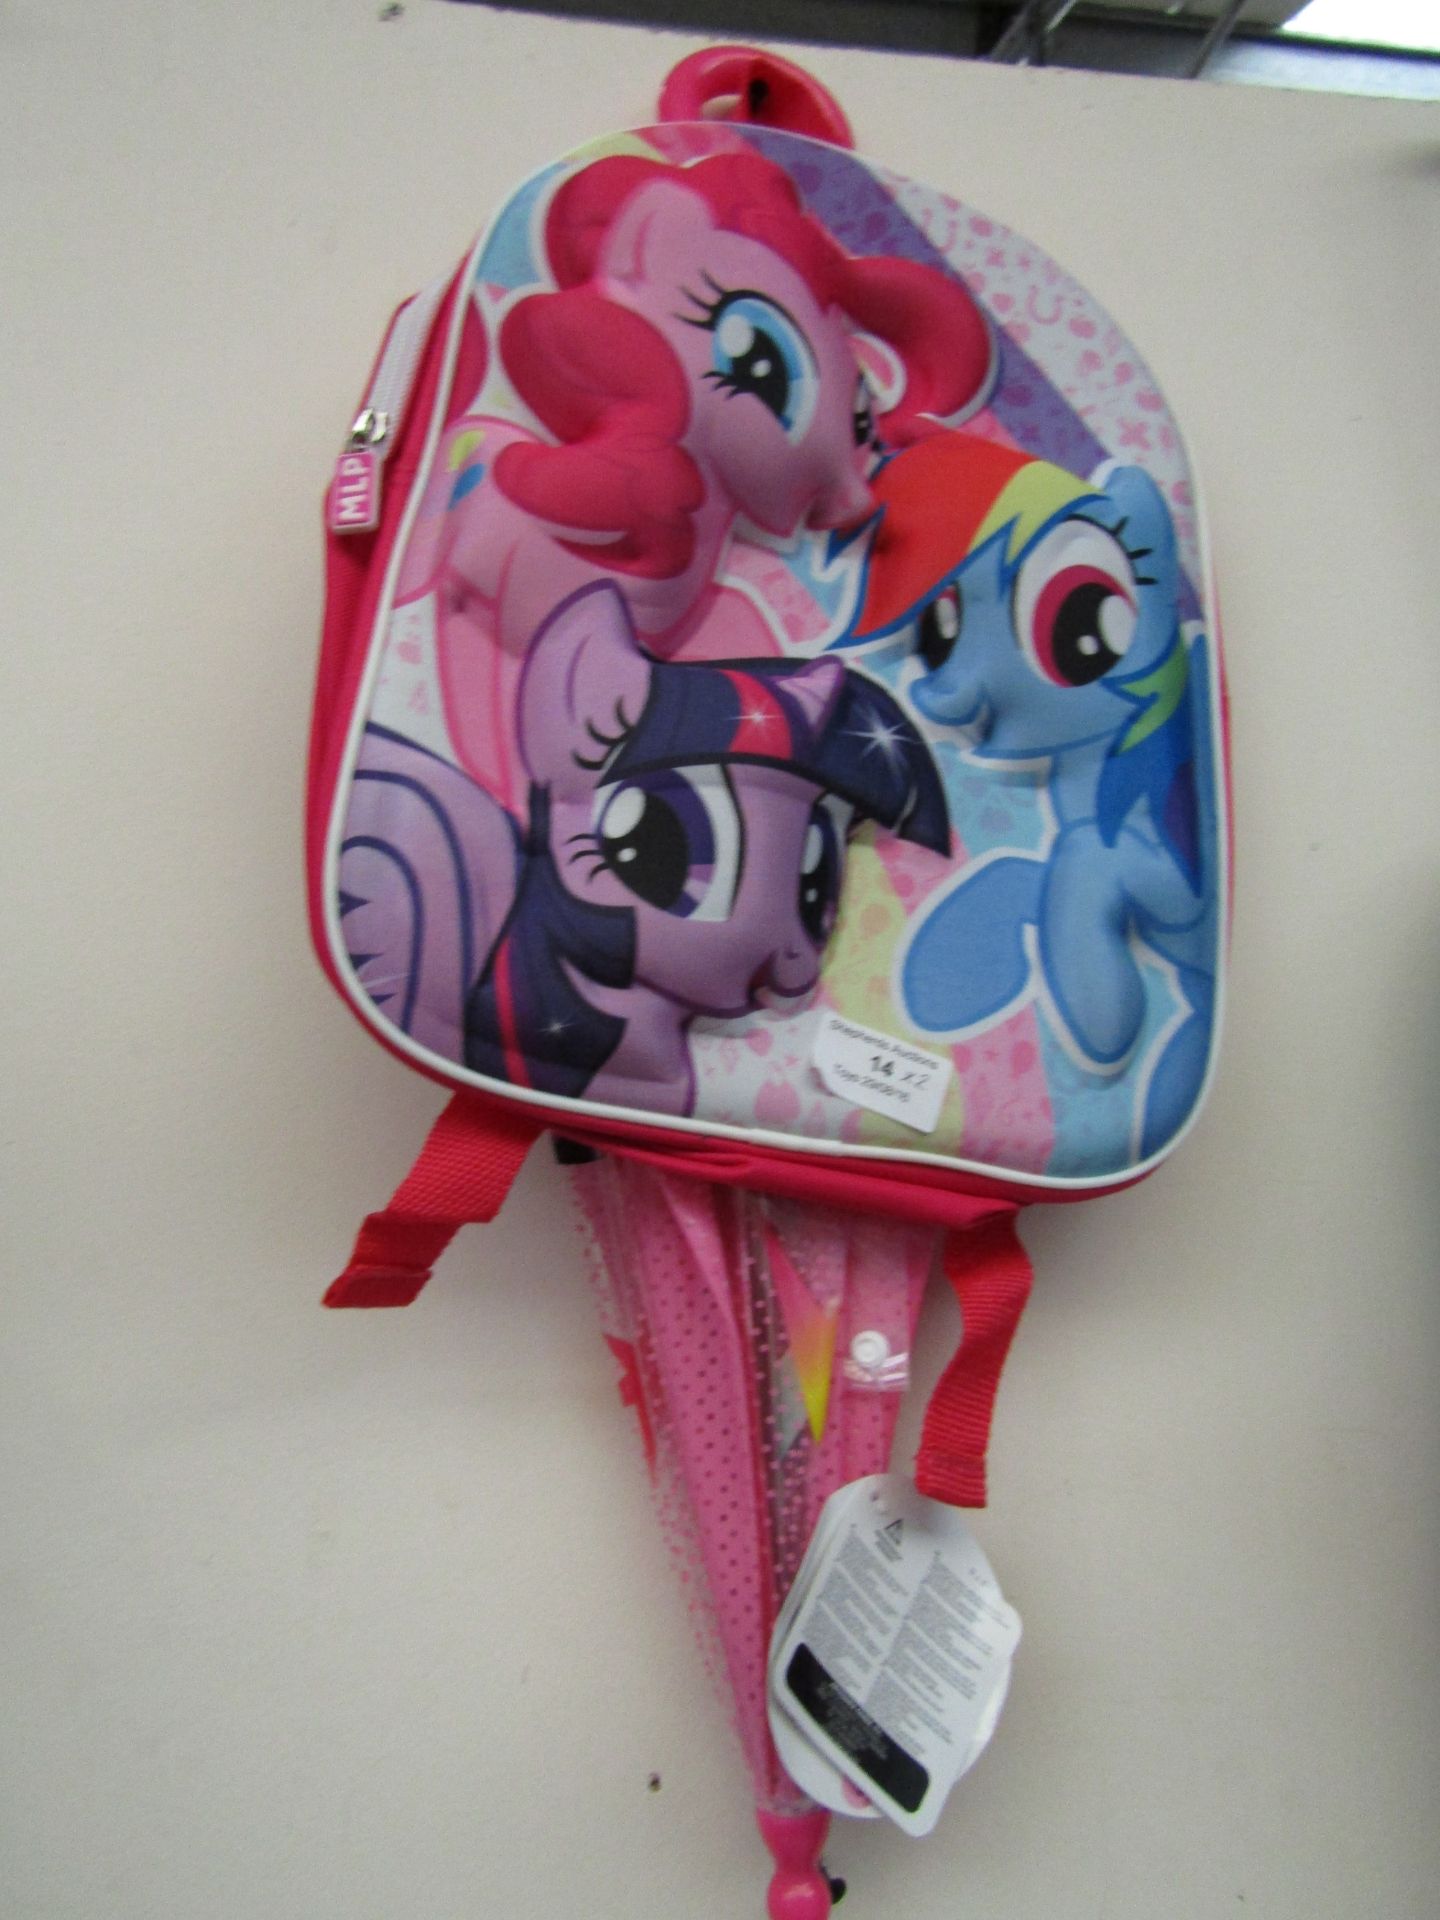 2x My Little Pony items being; My Little Pony backpack, looks new My Little Pony umbrella, looks